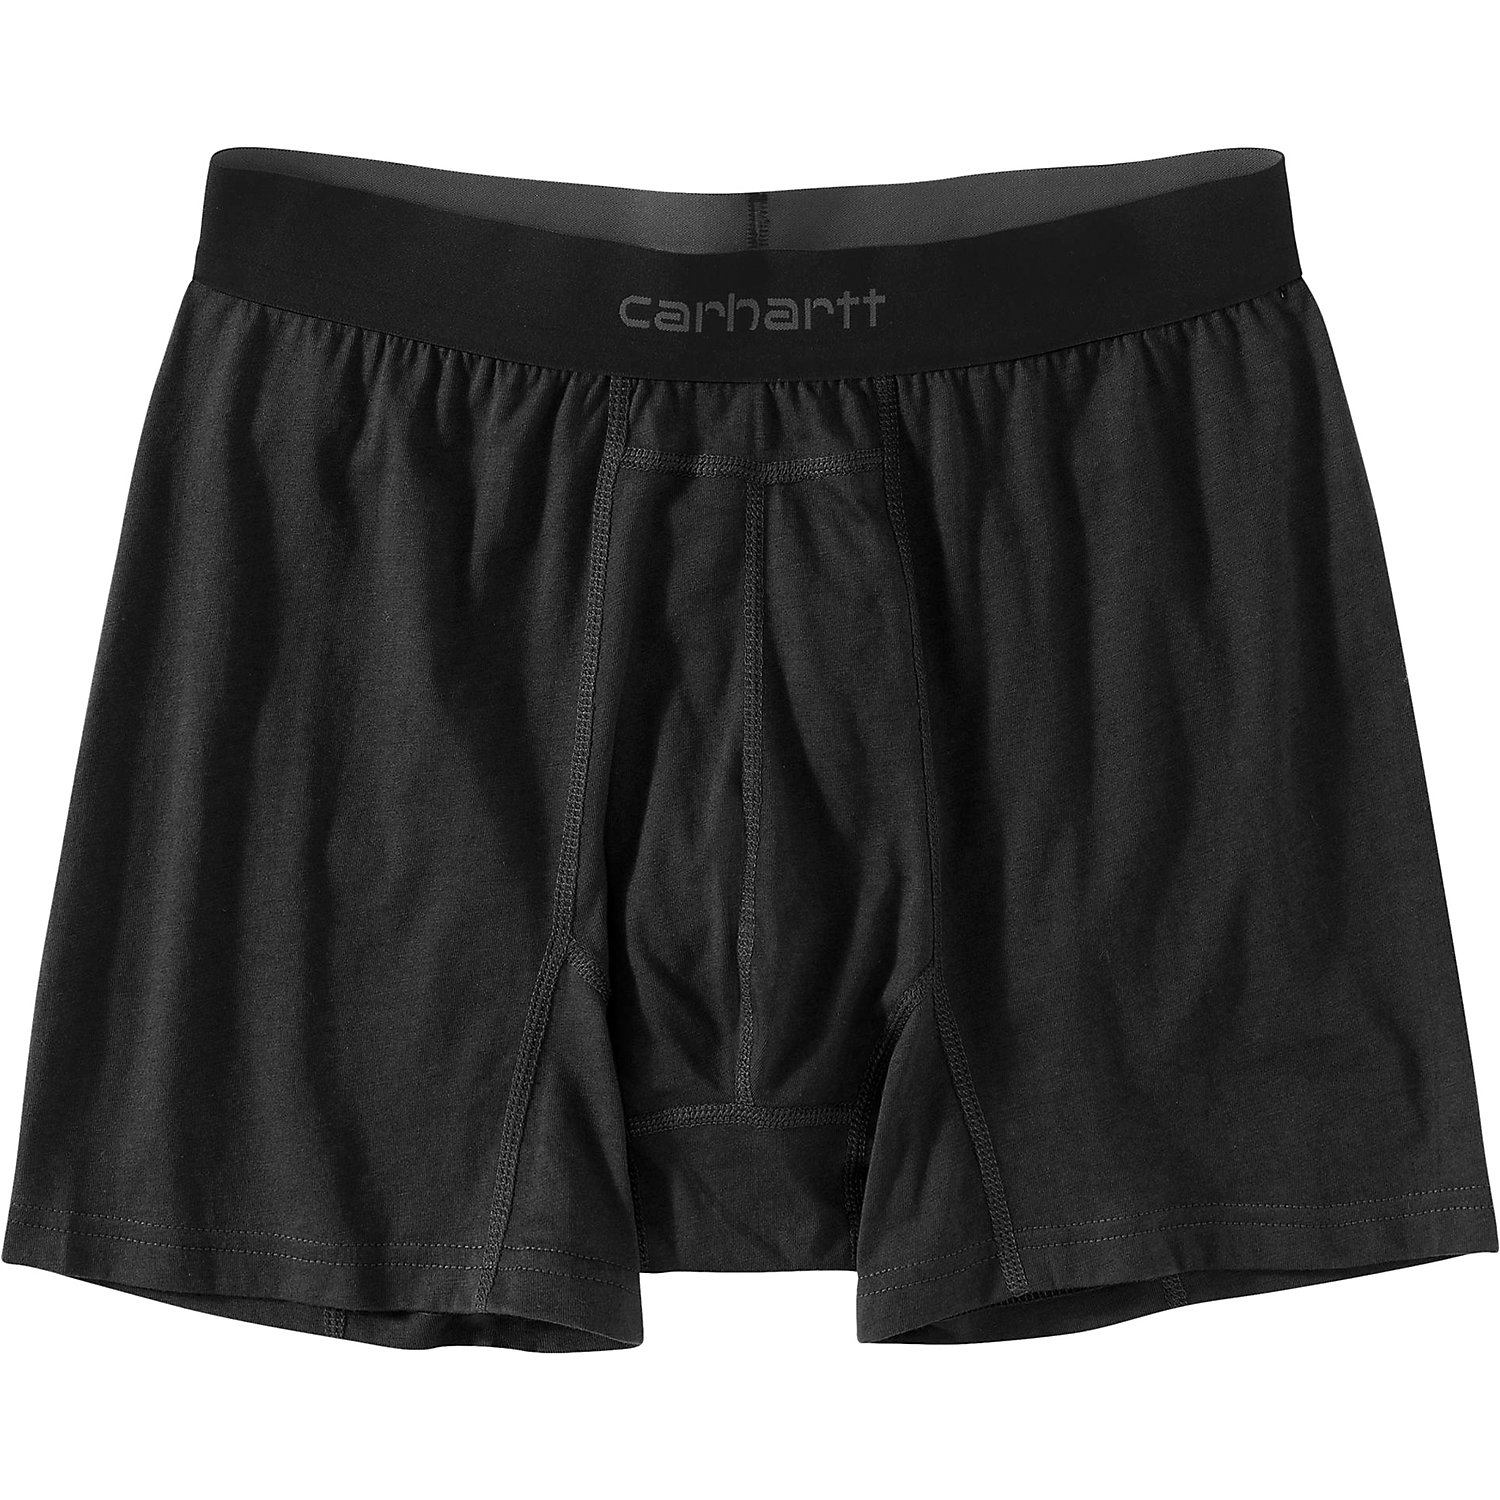 Carhartt Mens 5 Inch Basic Cotton-Poly Boxer Brief 2-Pack